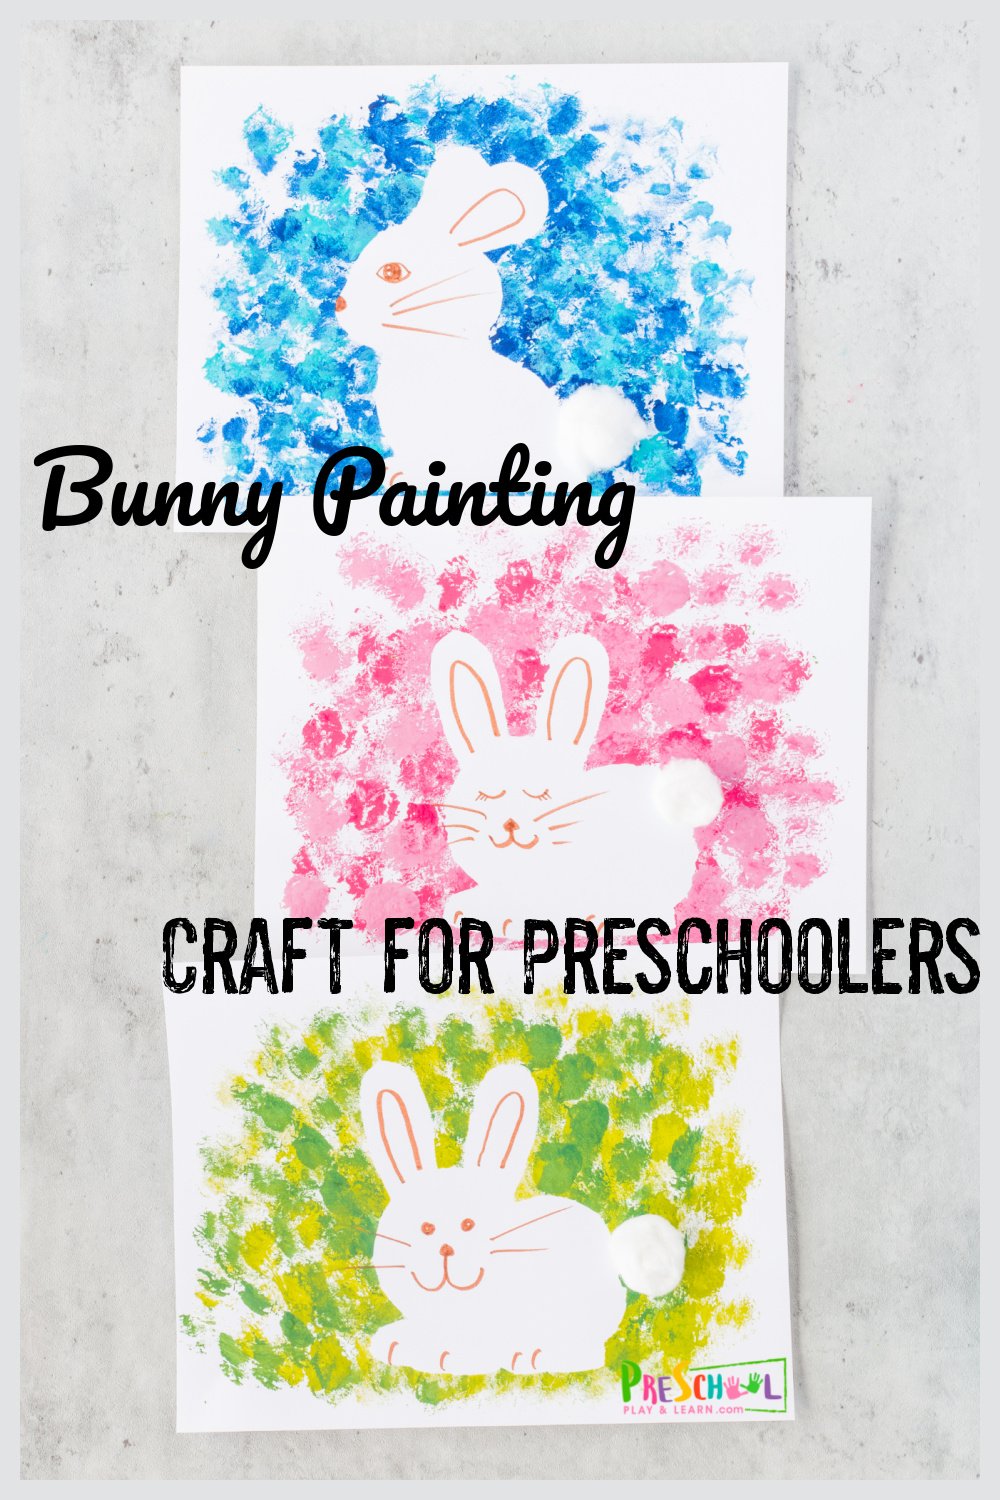 easy easter bunny crafts for kids